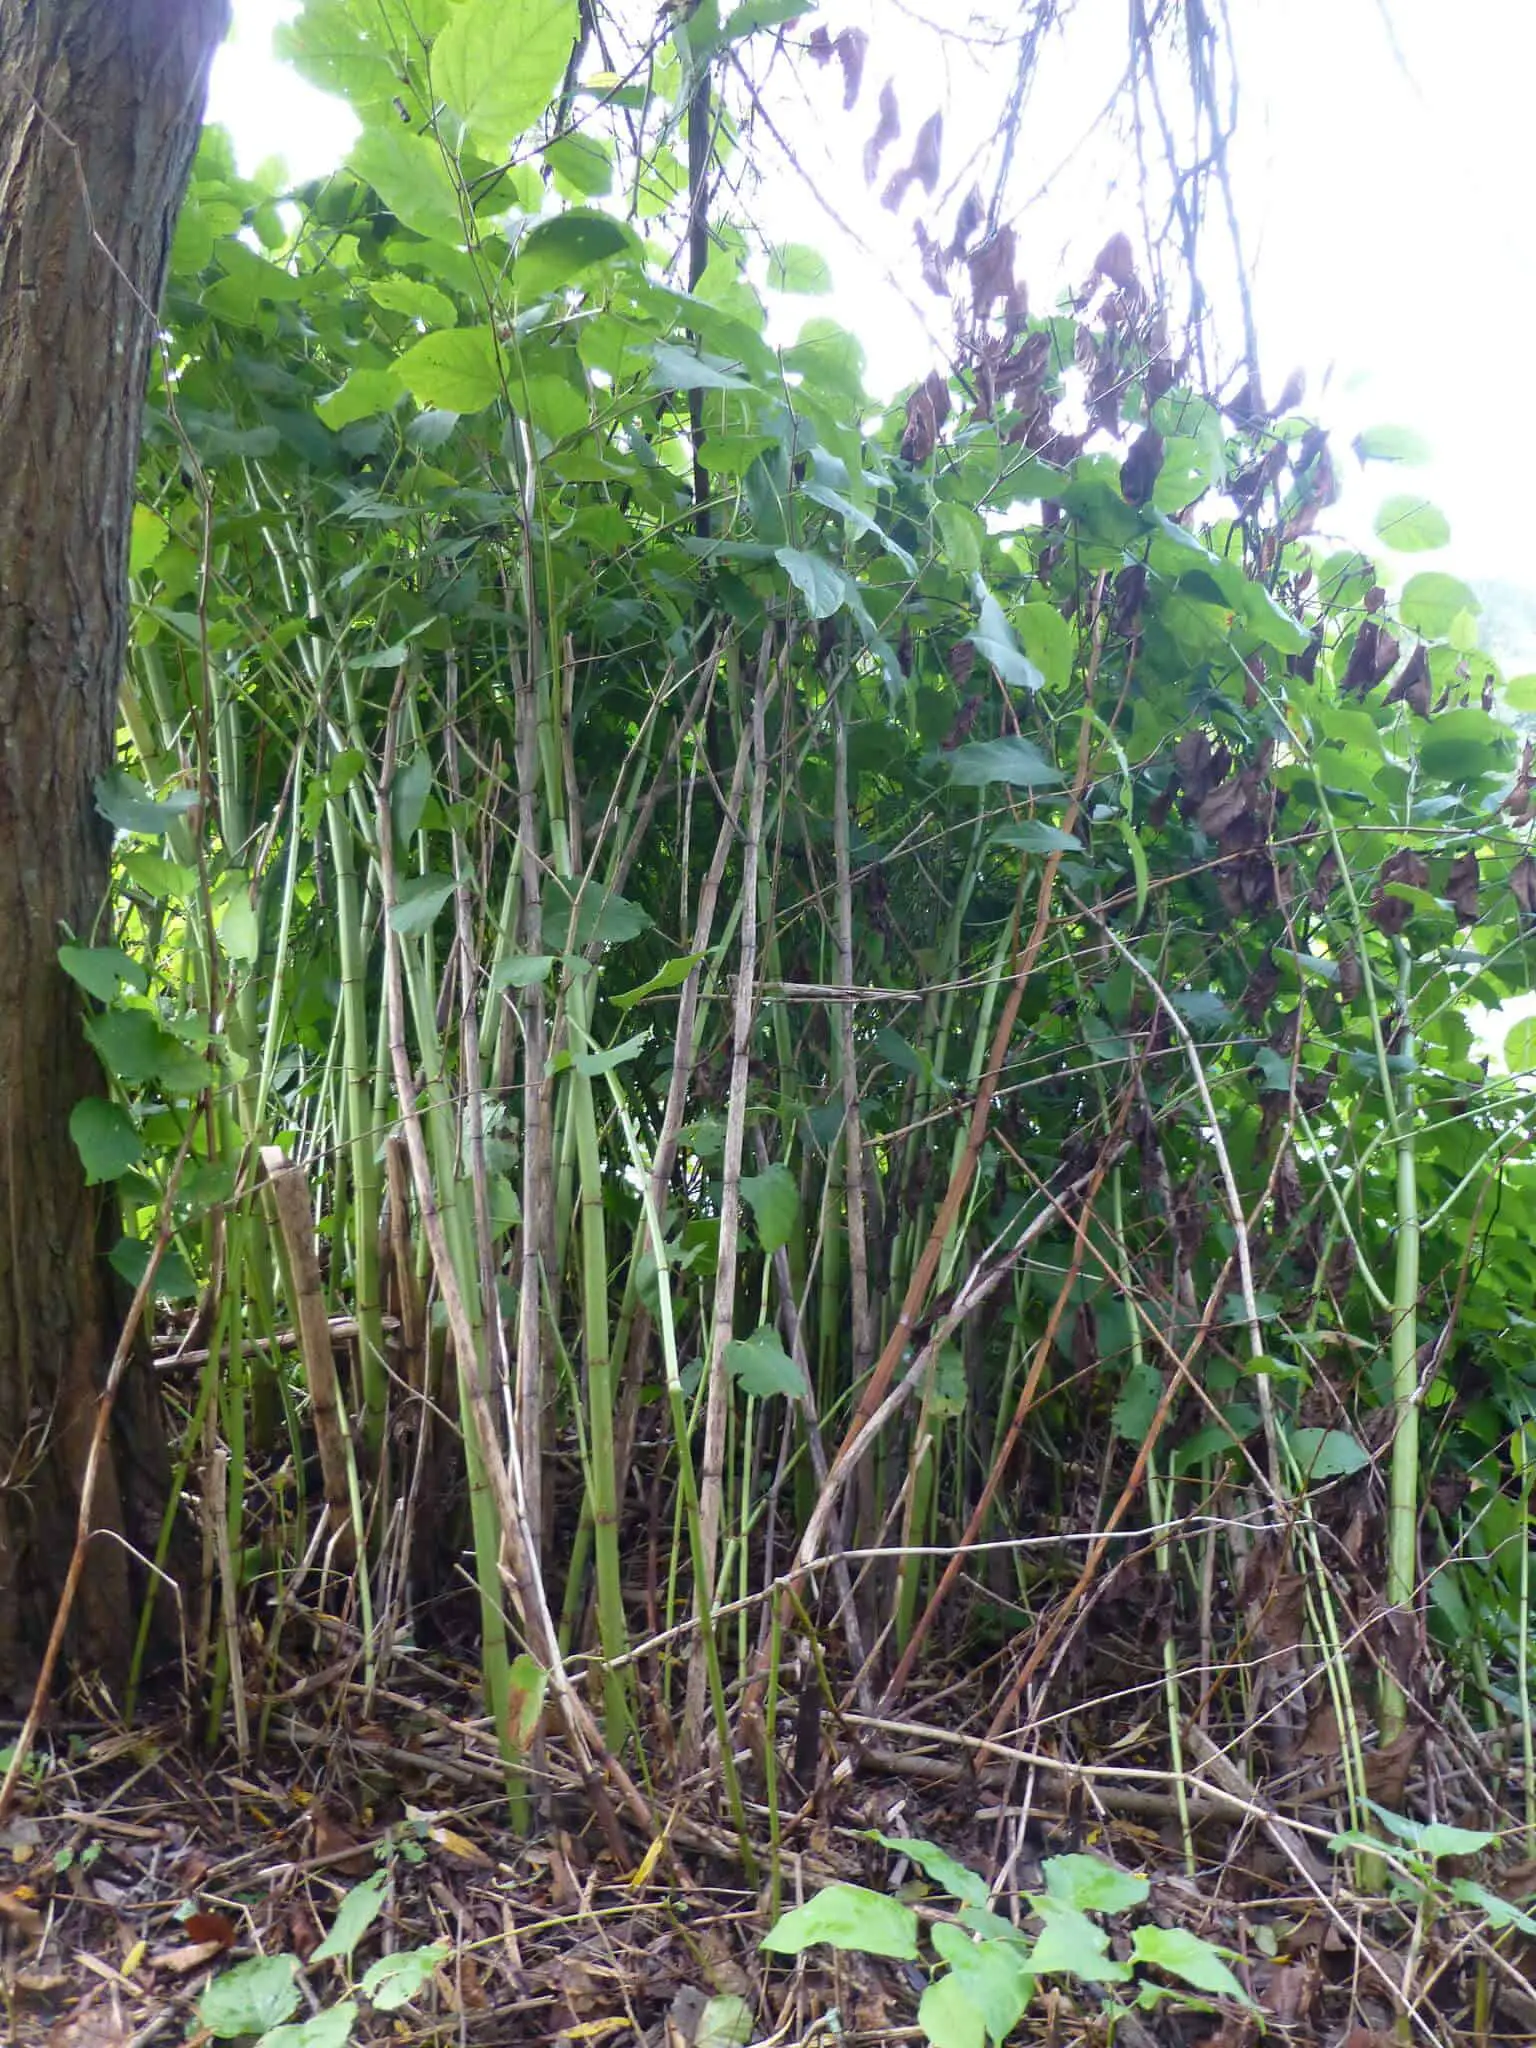 Japanese knotweed in April growing up to 3m by the end of summer